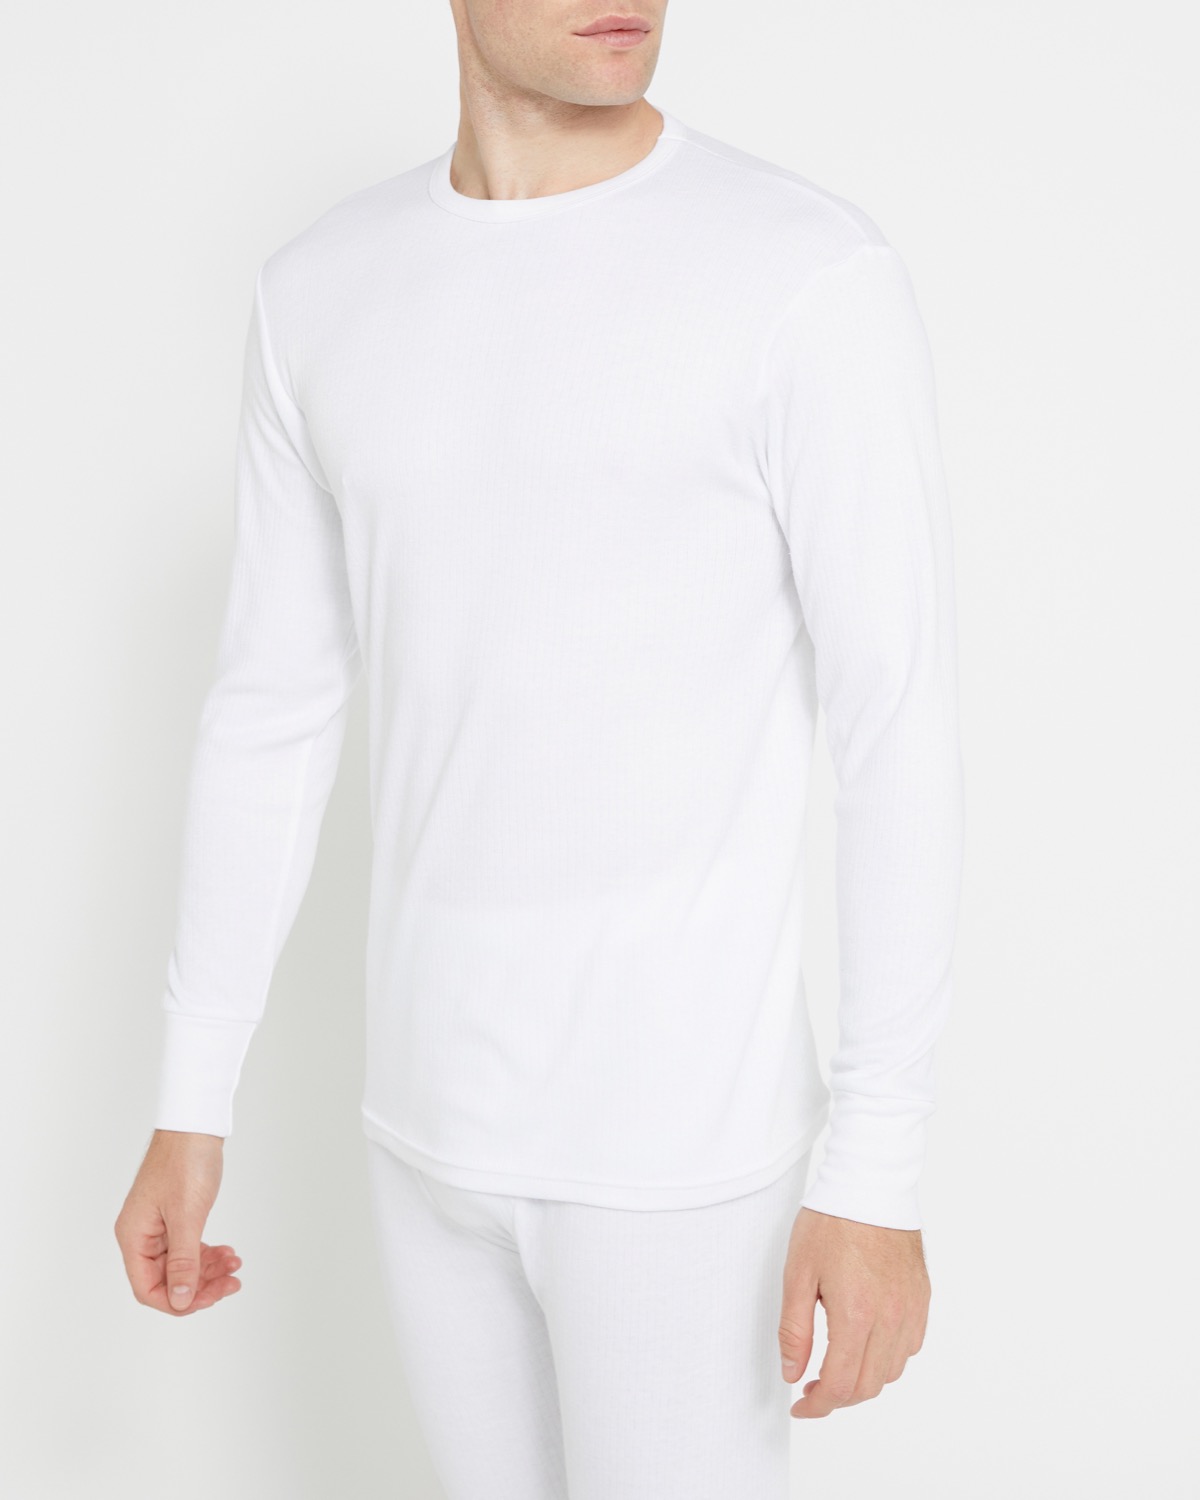 Dunnes Stores  White Thermal Long Pants